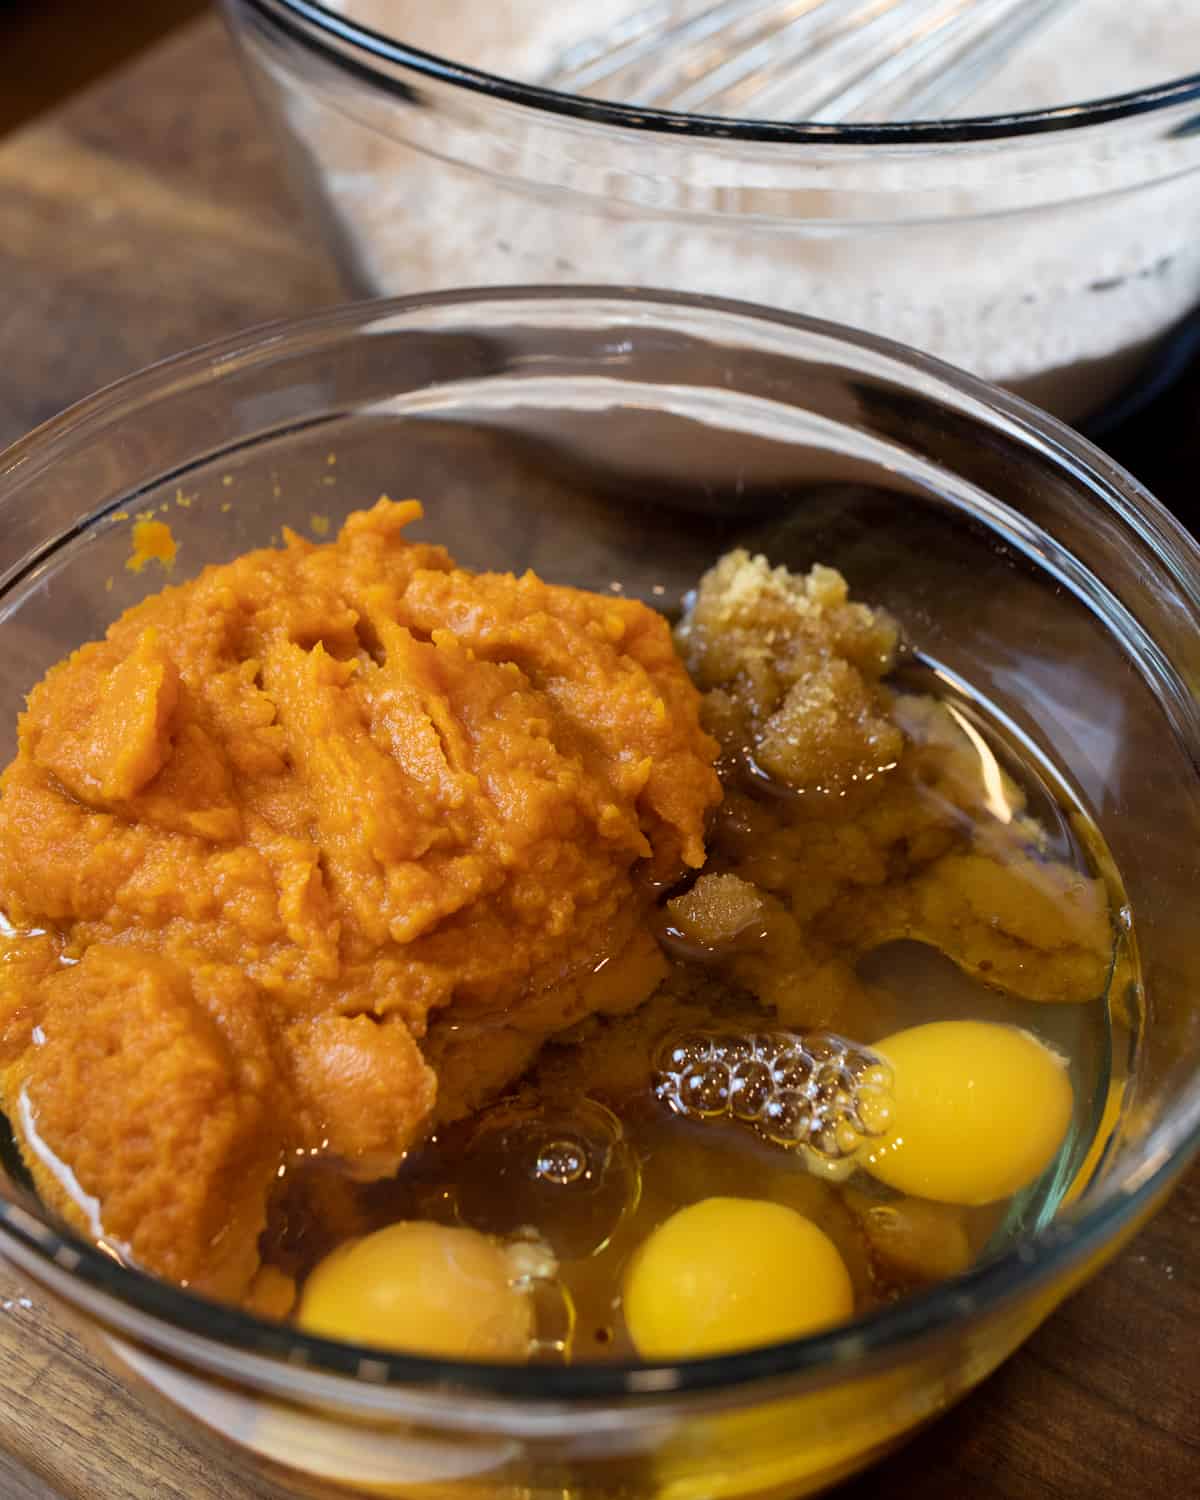 Mashed pumpkin, eggs and sugar in a glass bowl.